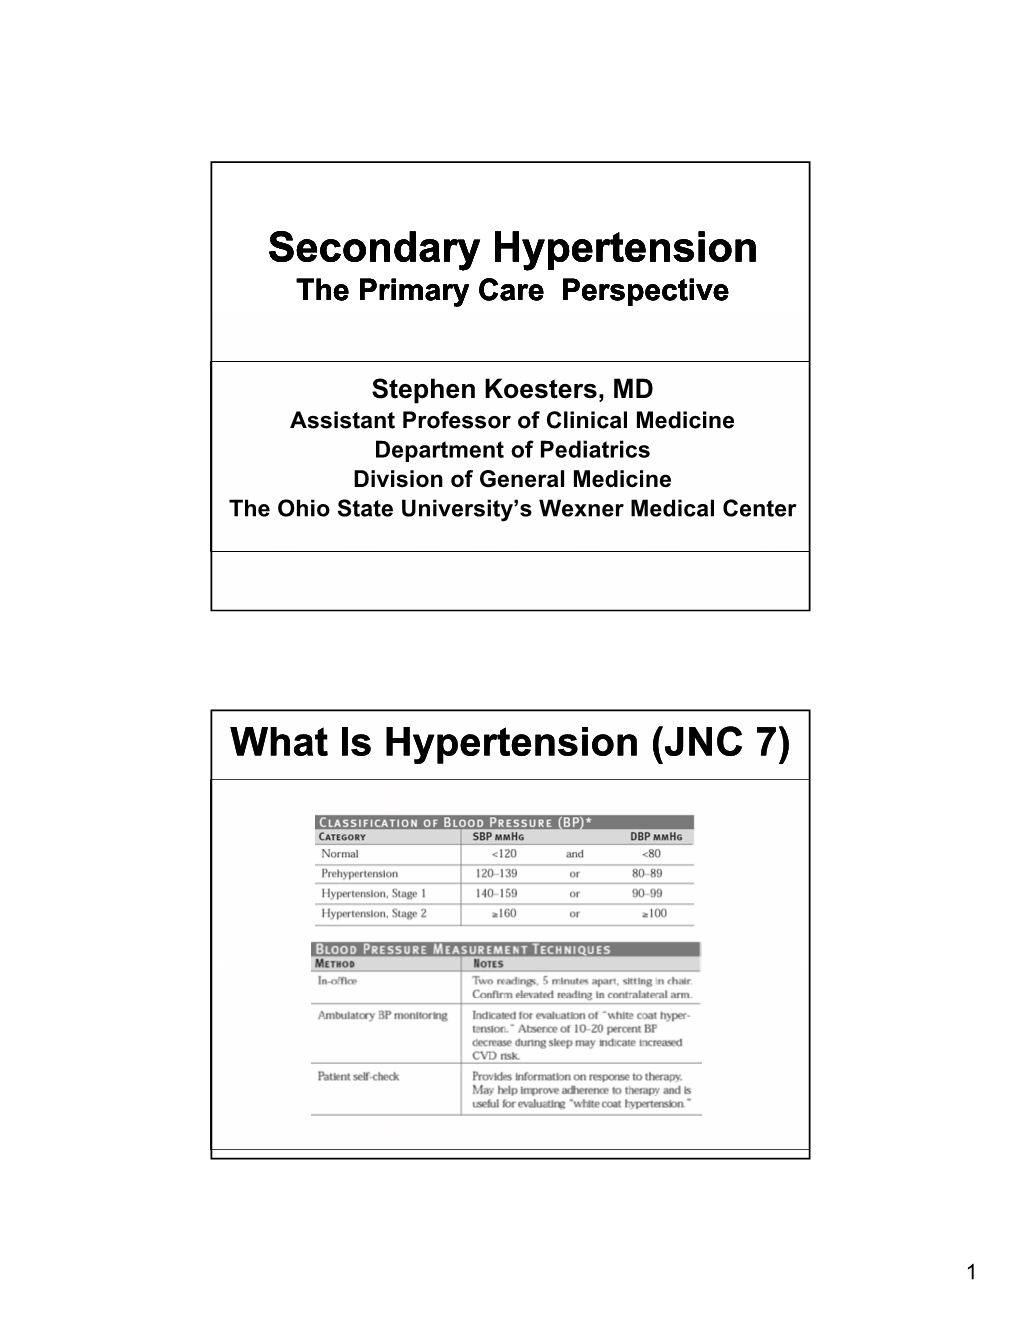 What Is Secondary Hypertension?